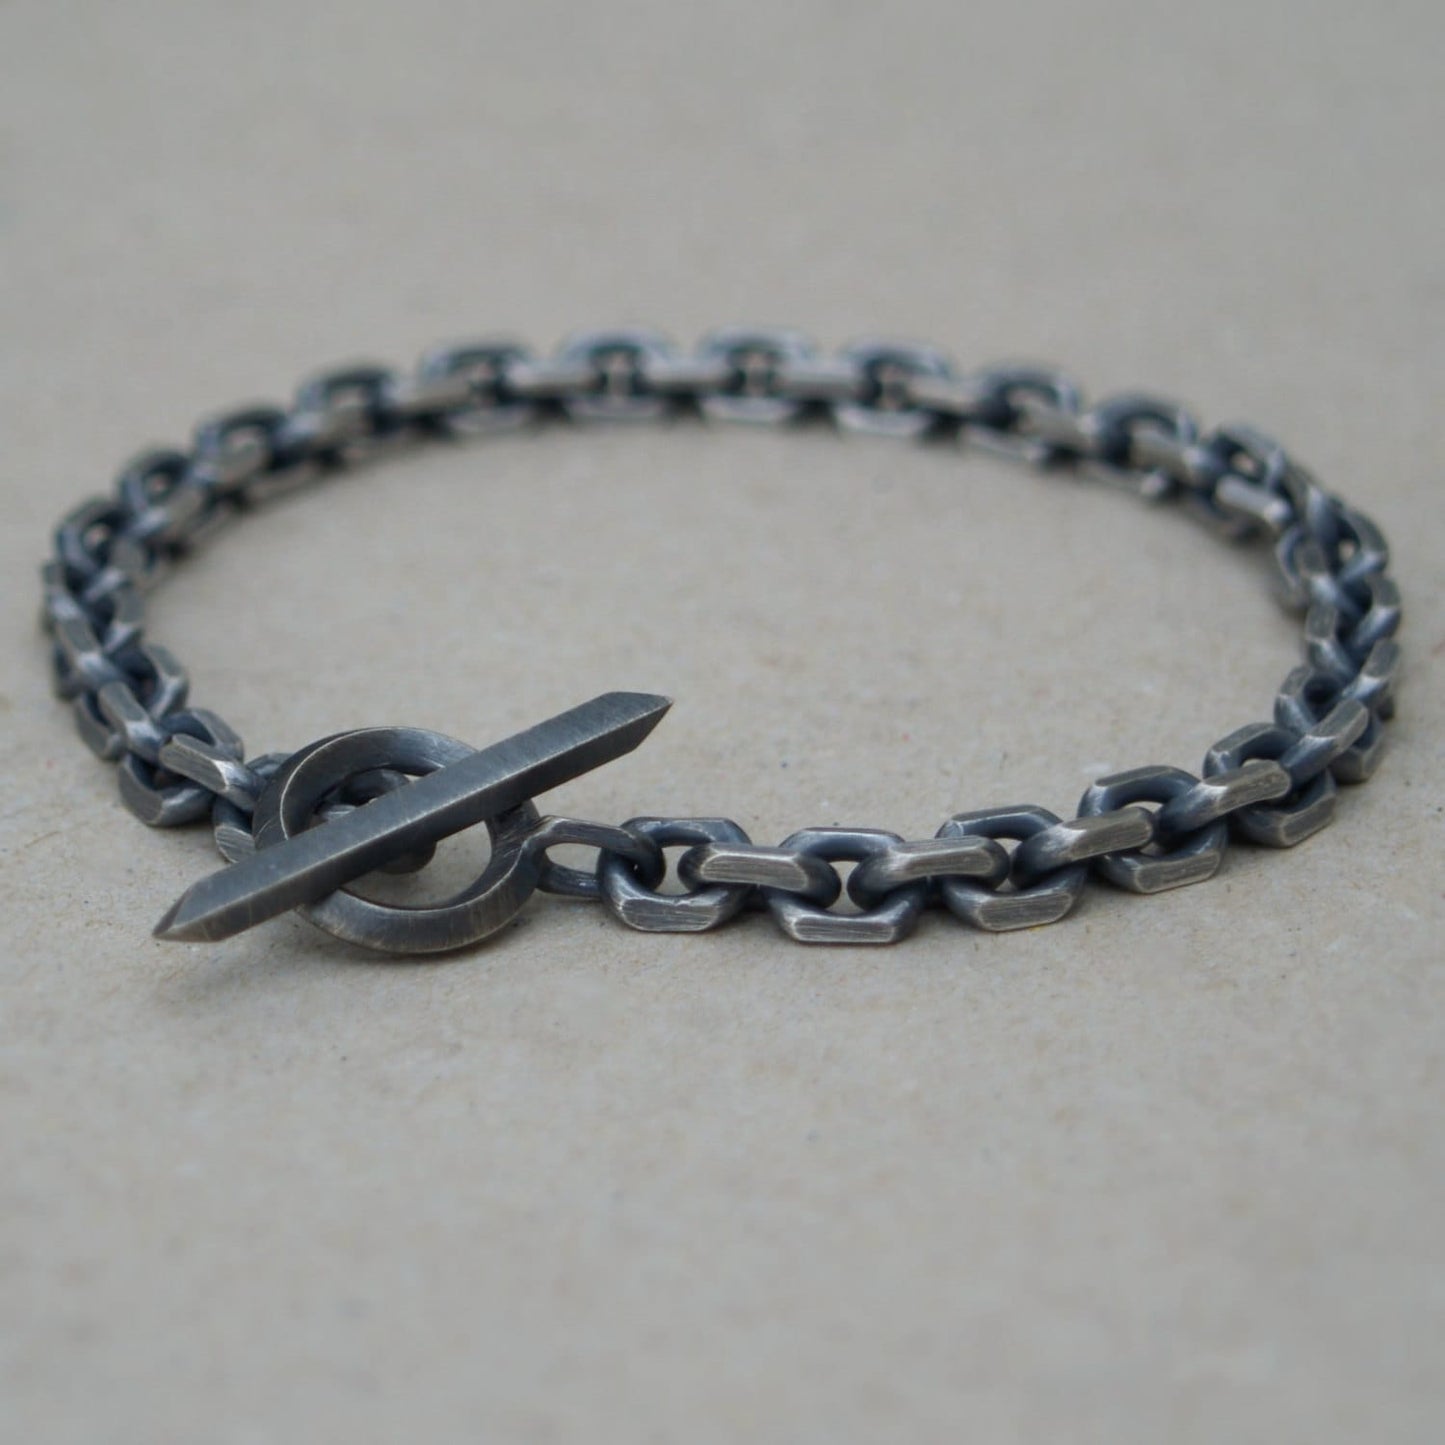 Handmade to order - Oxidised or polished solid silver 6.6mm wide diamond cut trace chain bracelet with a unique T-bar design